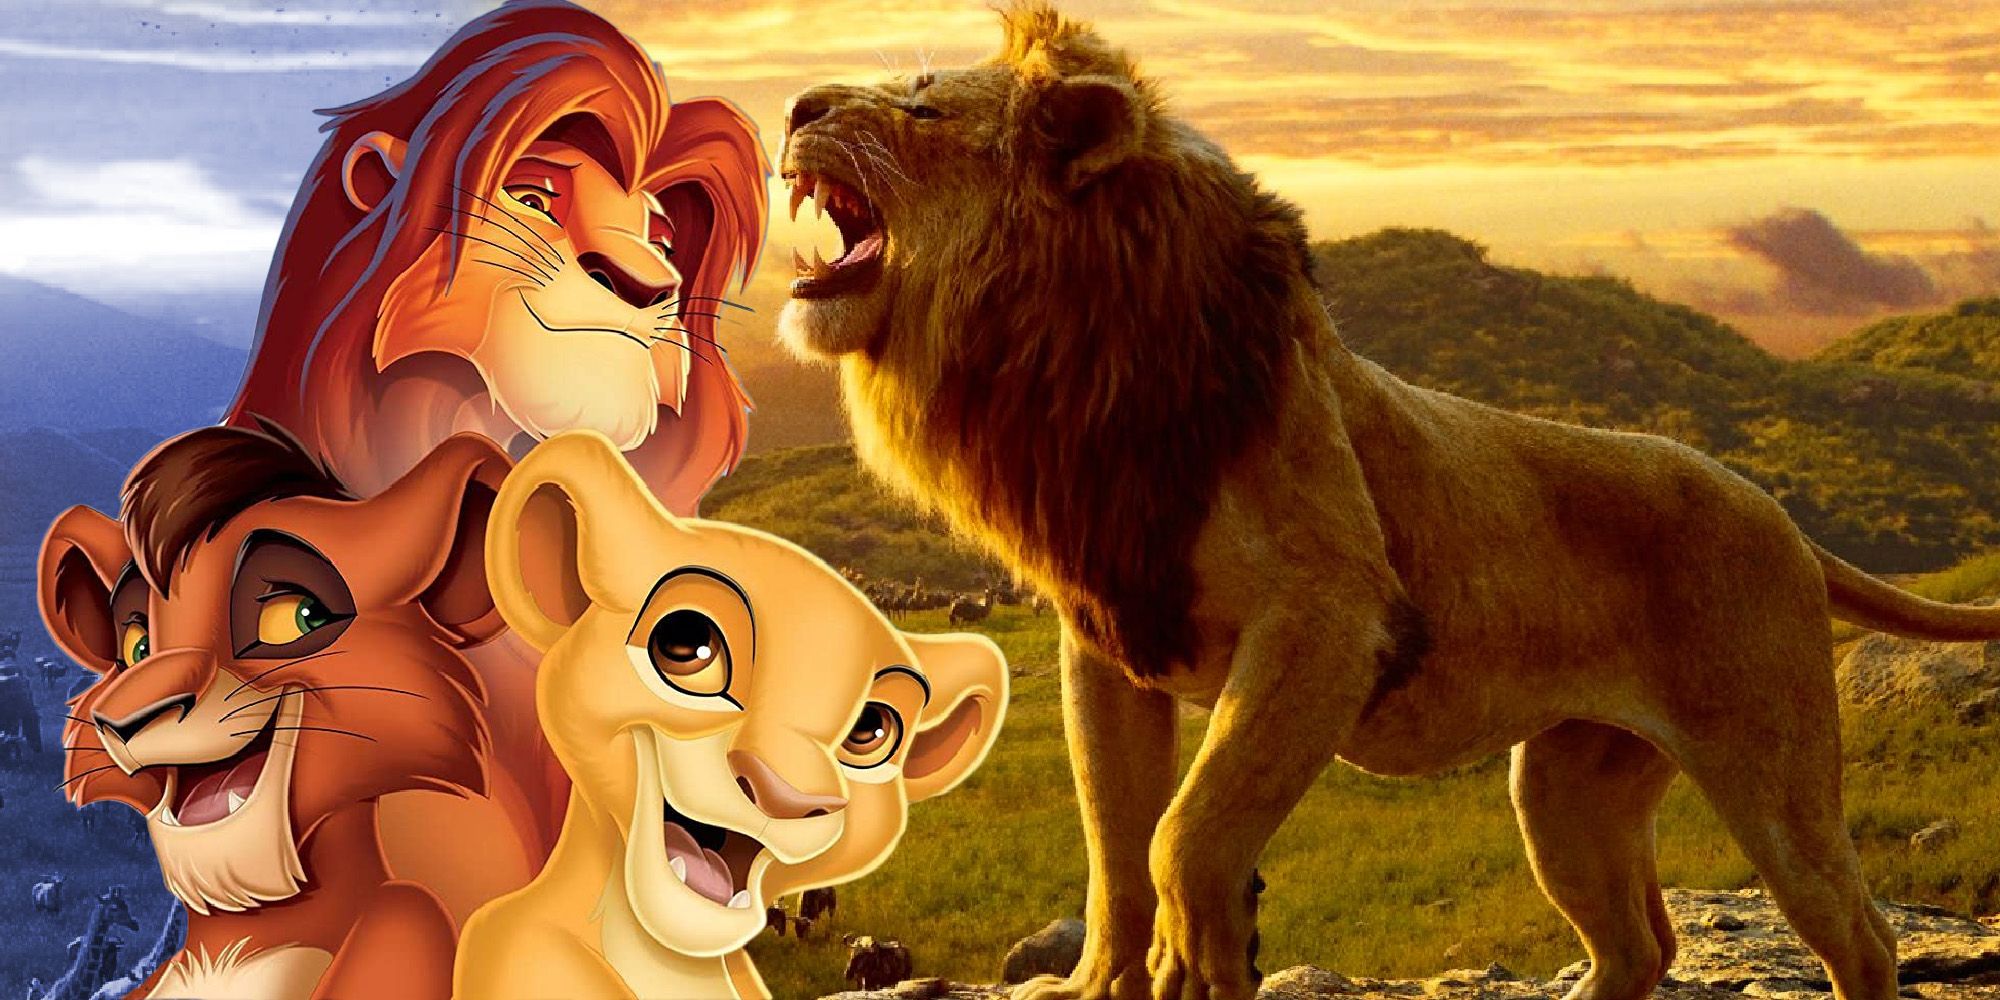 The Lion King 2 Why Disney's LiveAction Sequel Won't Adapt Simba's Pride